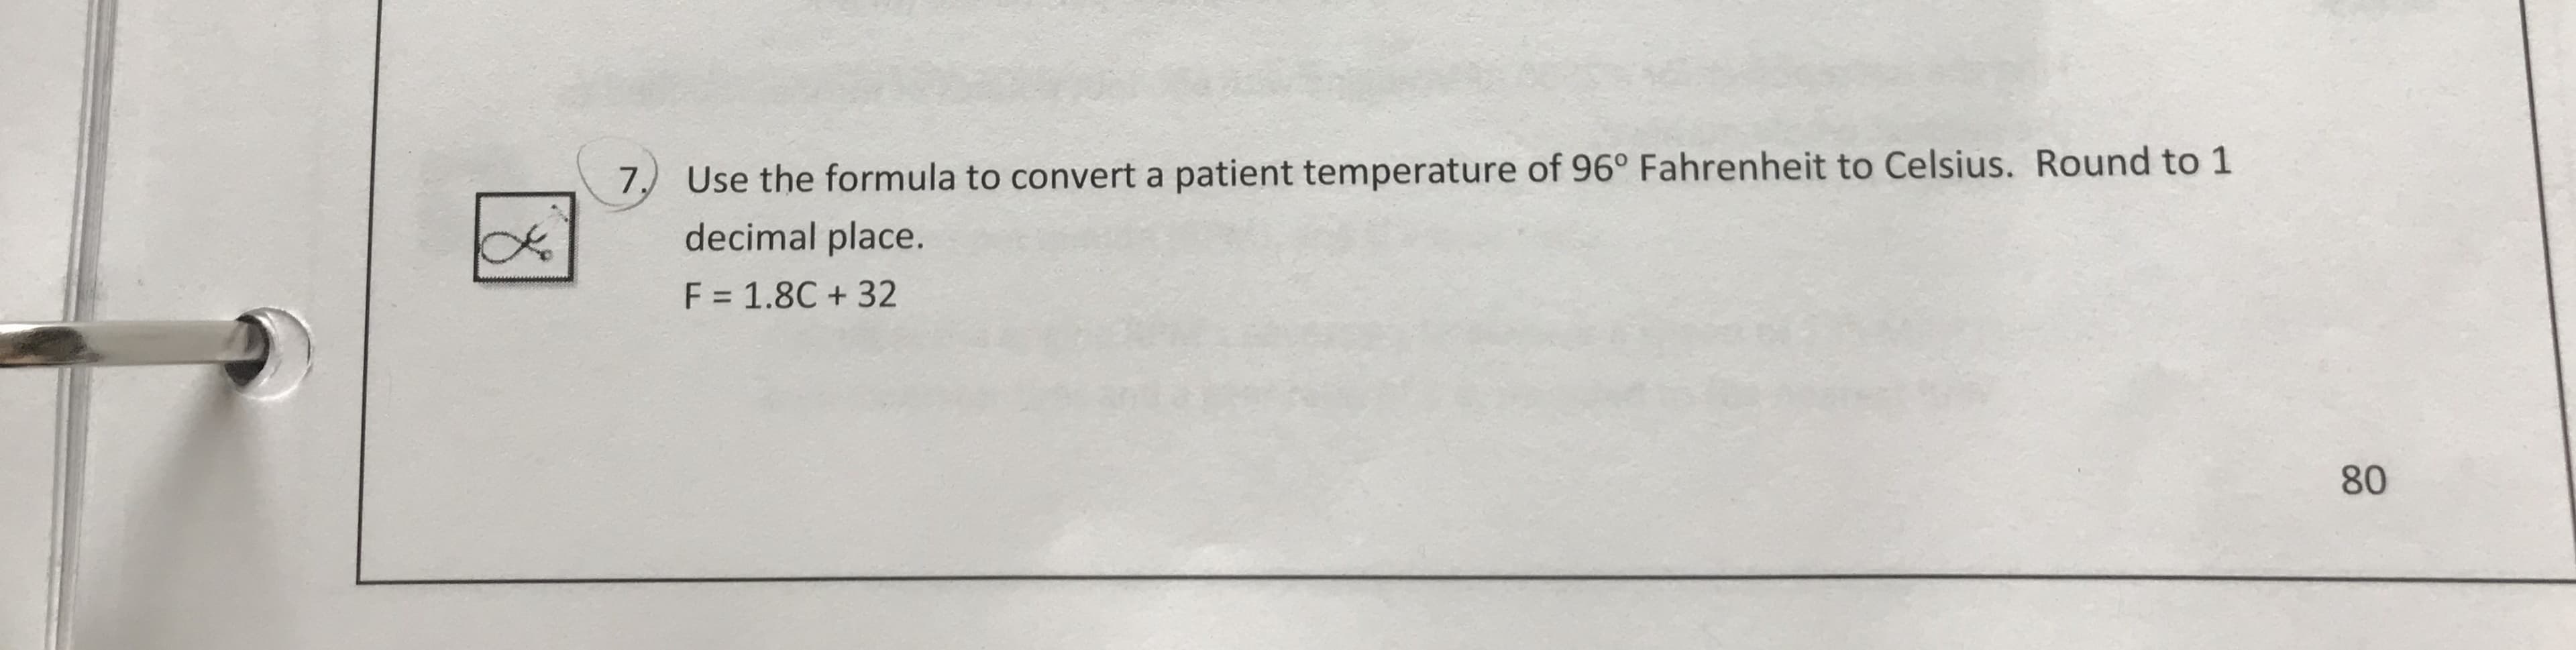 Use the formula to convert a patient temperature of 96" Fahrenheit to Celsius. Round to 1
decimal place
F = 1.8C + 32
7)
80
